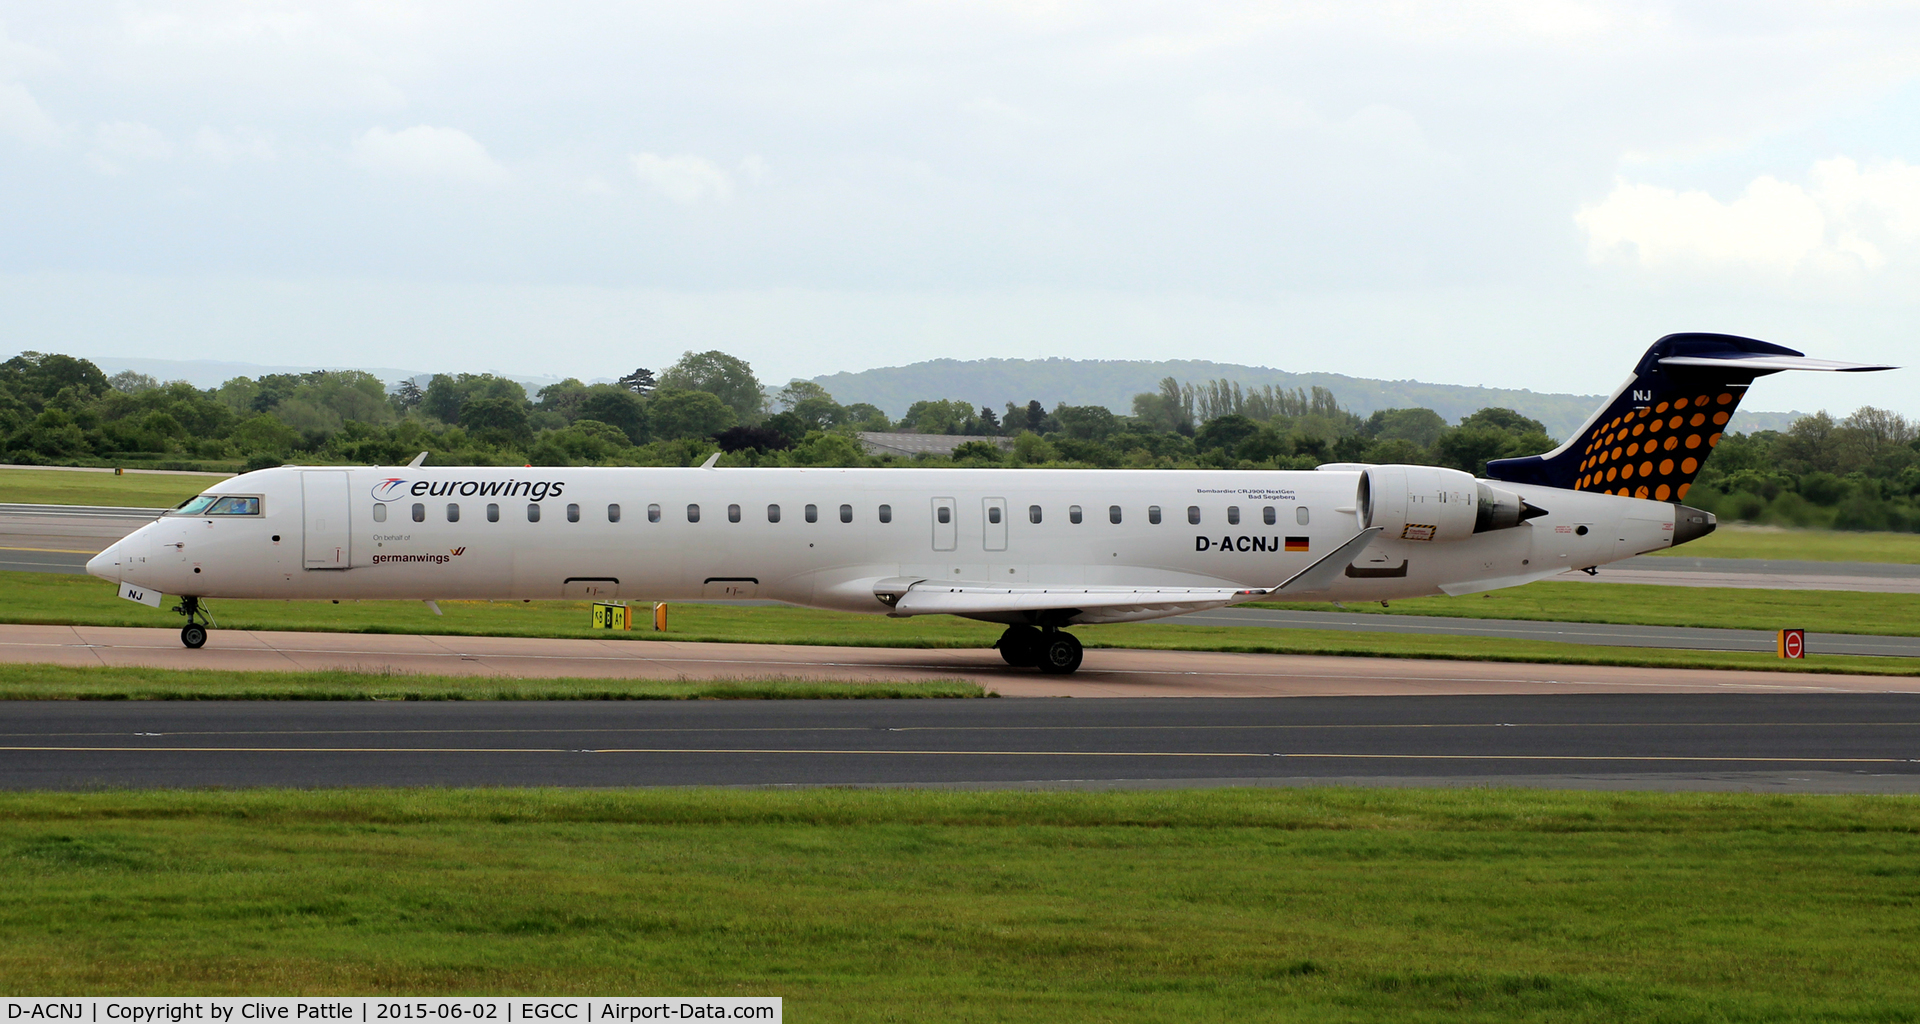 D-ACNJ, 2010 Bombardier CRJ-900 NG (CL-600-2D24) C/N 15249, Heading for the gates after arrival at Manchester Airport EGCC